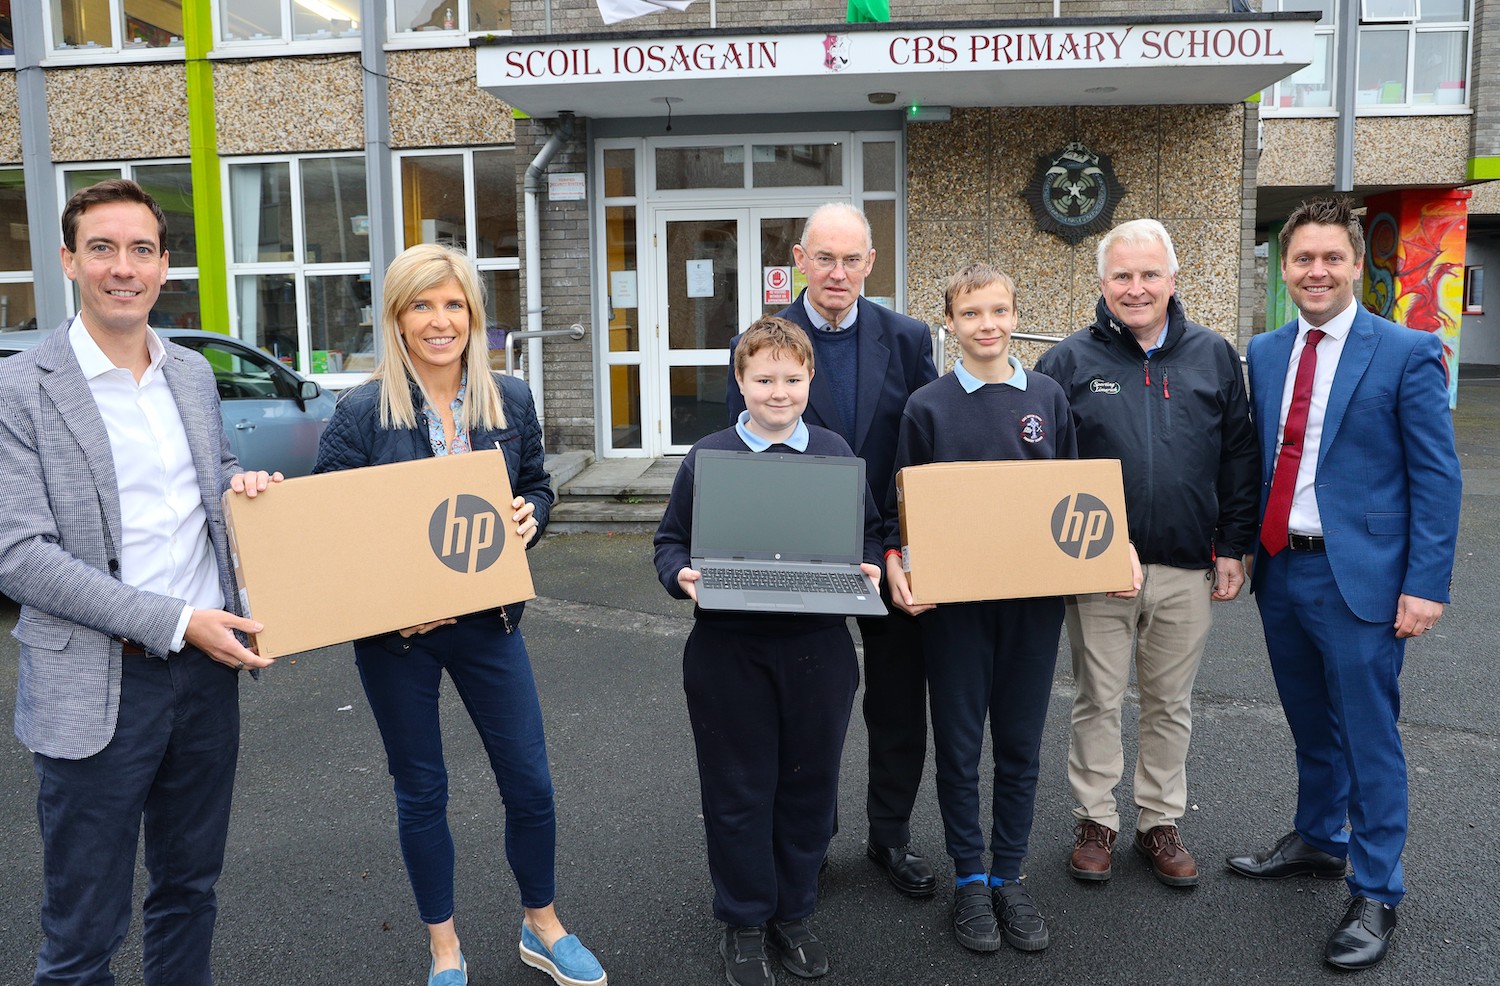 LEDP supports Scoil Iosagain - Pictured at Scoil Iosagain CBS Primary School were Principal Dennis Barry, Deputy Principal Doireann Garrard, Br James Dormer and students, along with LEDP CEO Niall O’Callaghan and George Lee, Manager of Community Initiatives LEDP. Picture: Dermot Lynch